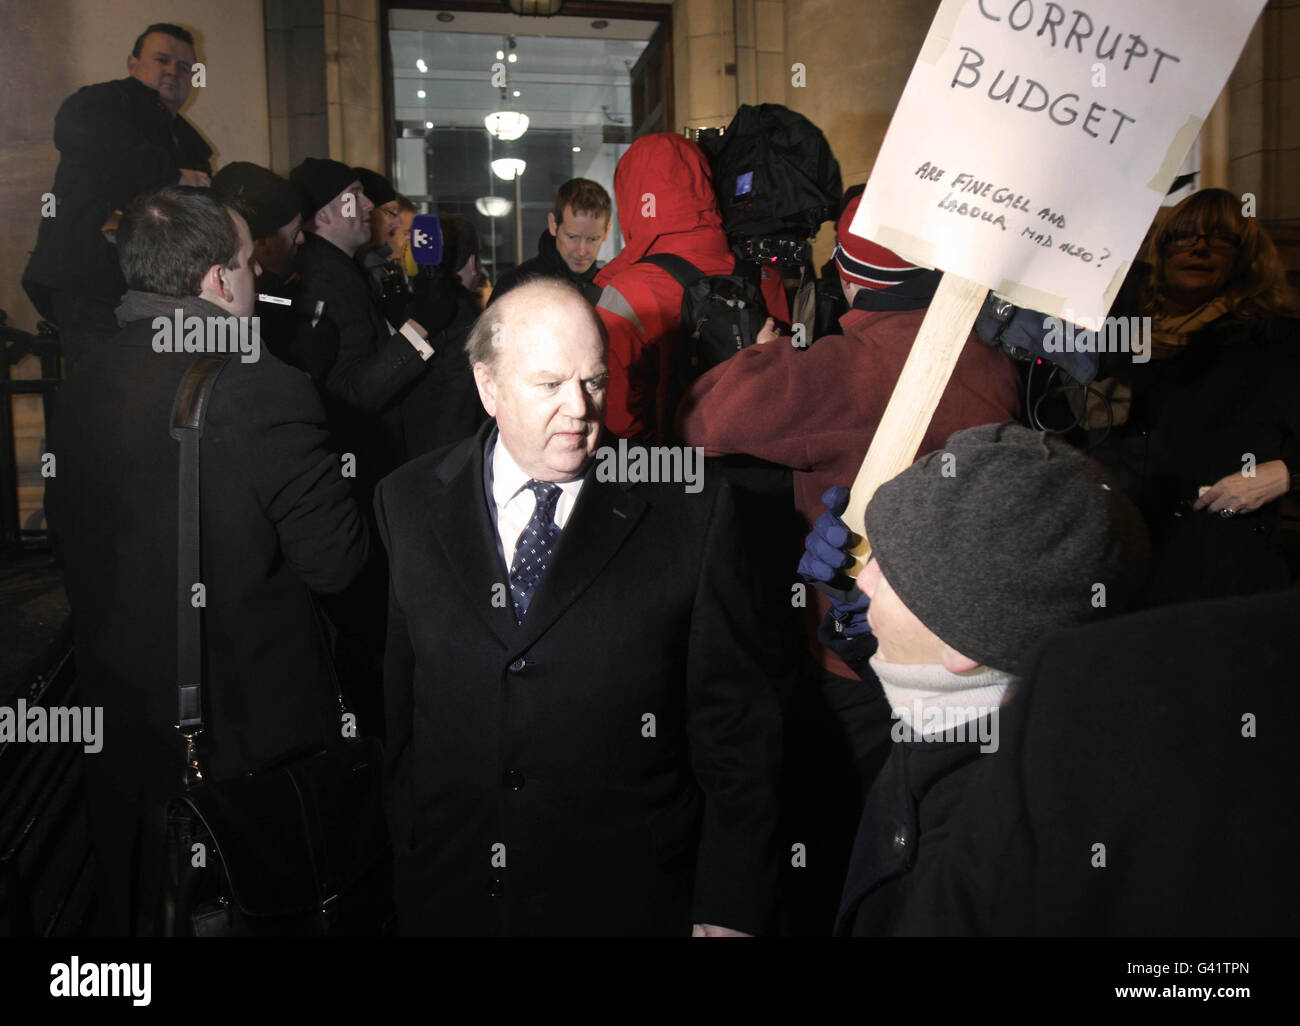 Fine Gael's Michael Noonan is confronted by a protester outside the Finance department on Merrion row in Dublin. Ireland's minority Government tonight secured support from the Opposition parties to pass the Finance Bill and dissolve parliament next week. Stock Photo